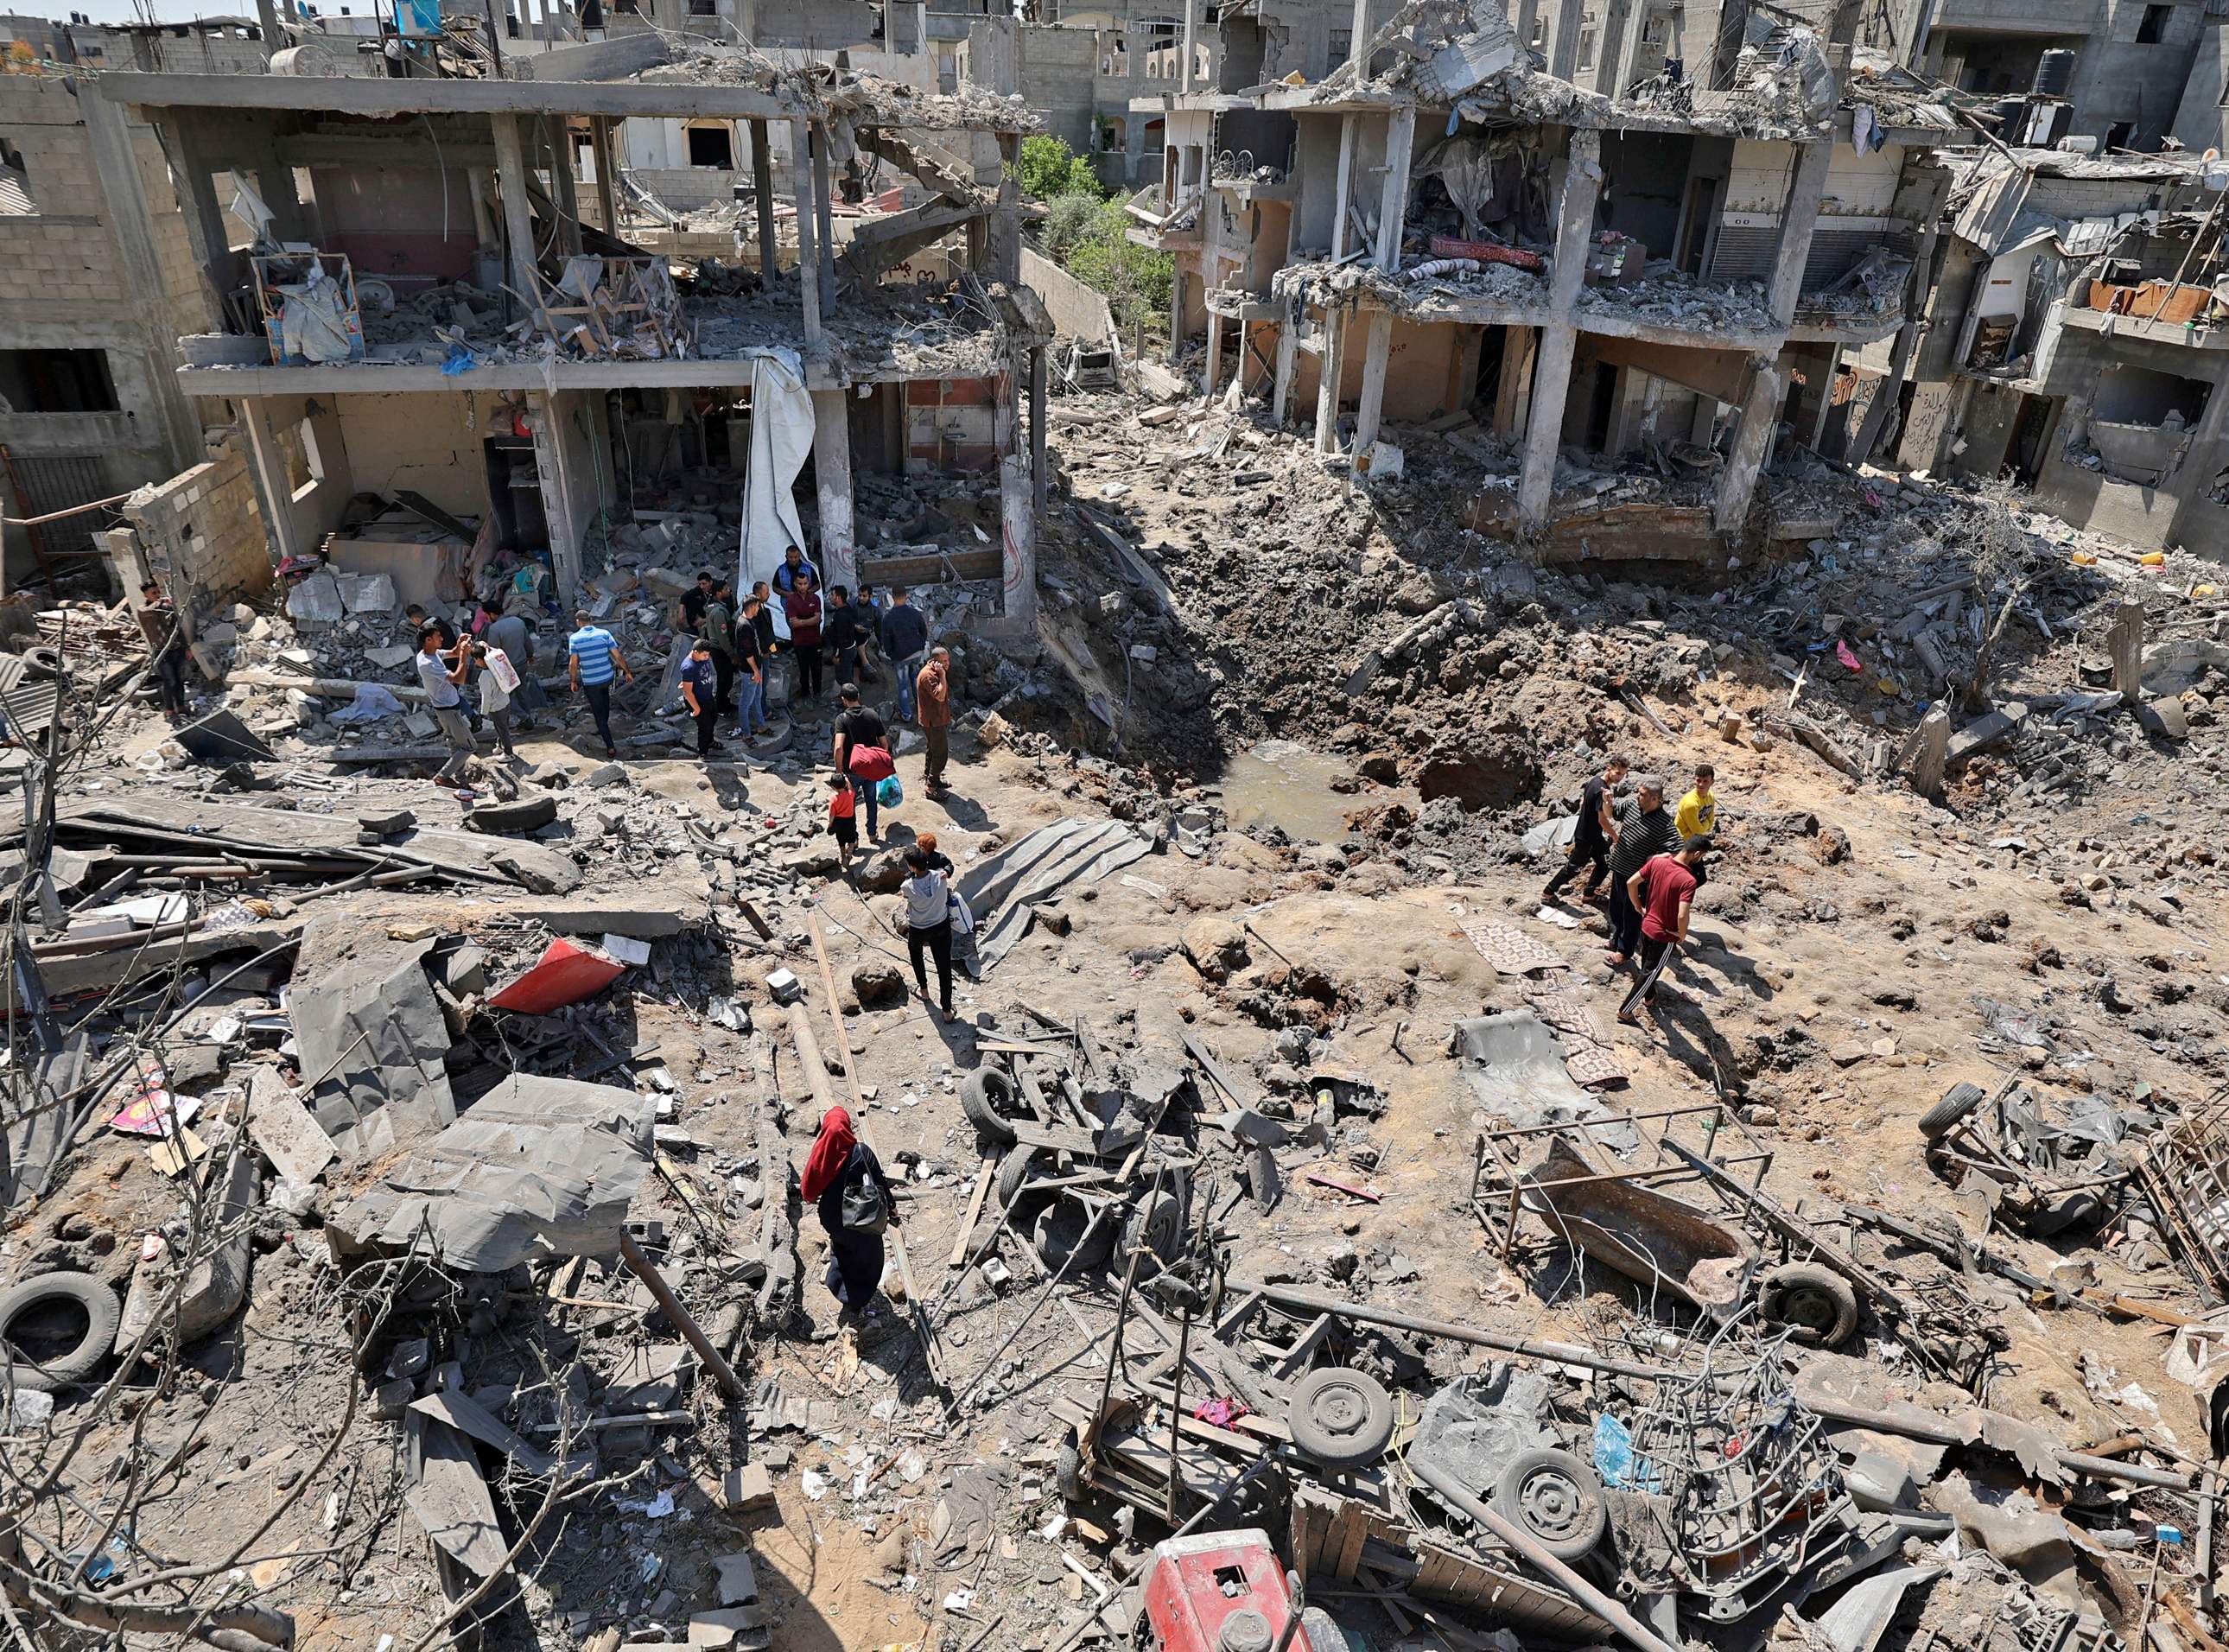 PHOTO: Palestinians assess the damage caused by Israeli air strikes, in Beit Hanun in the northern Gaza Strip, on May 14, 2021.